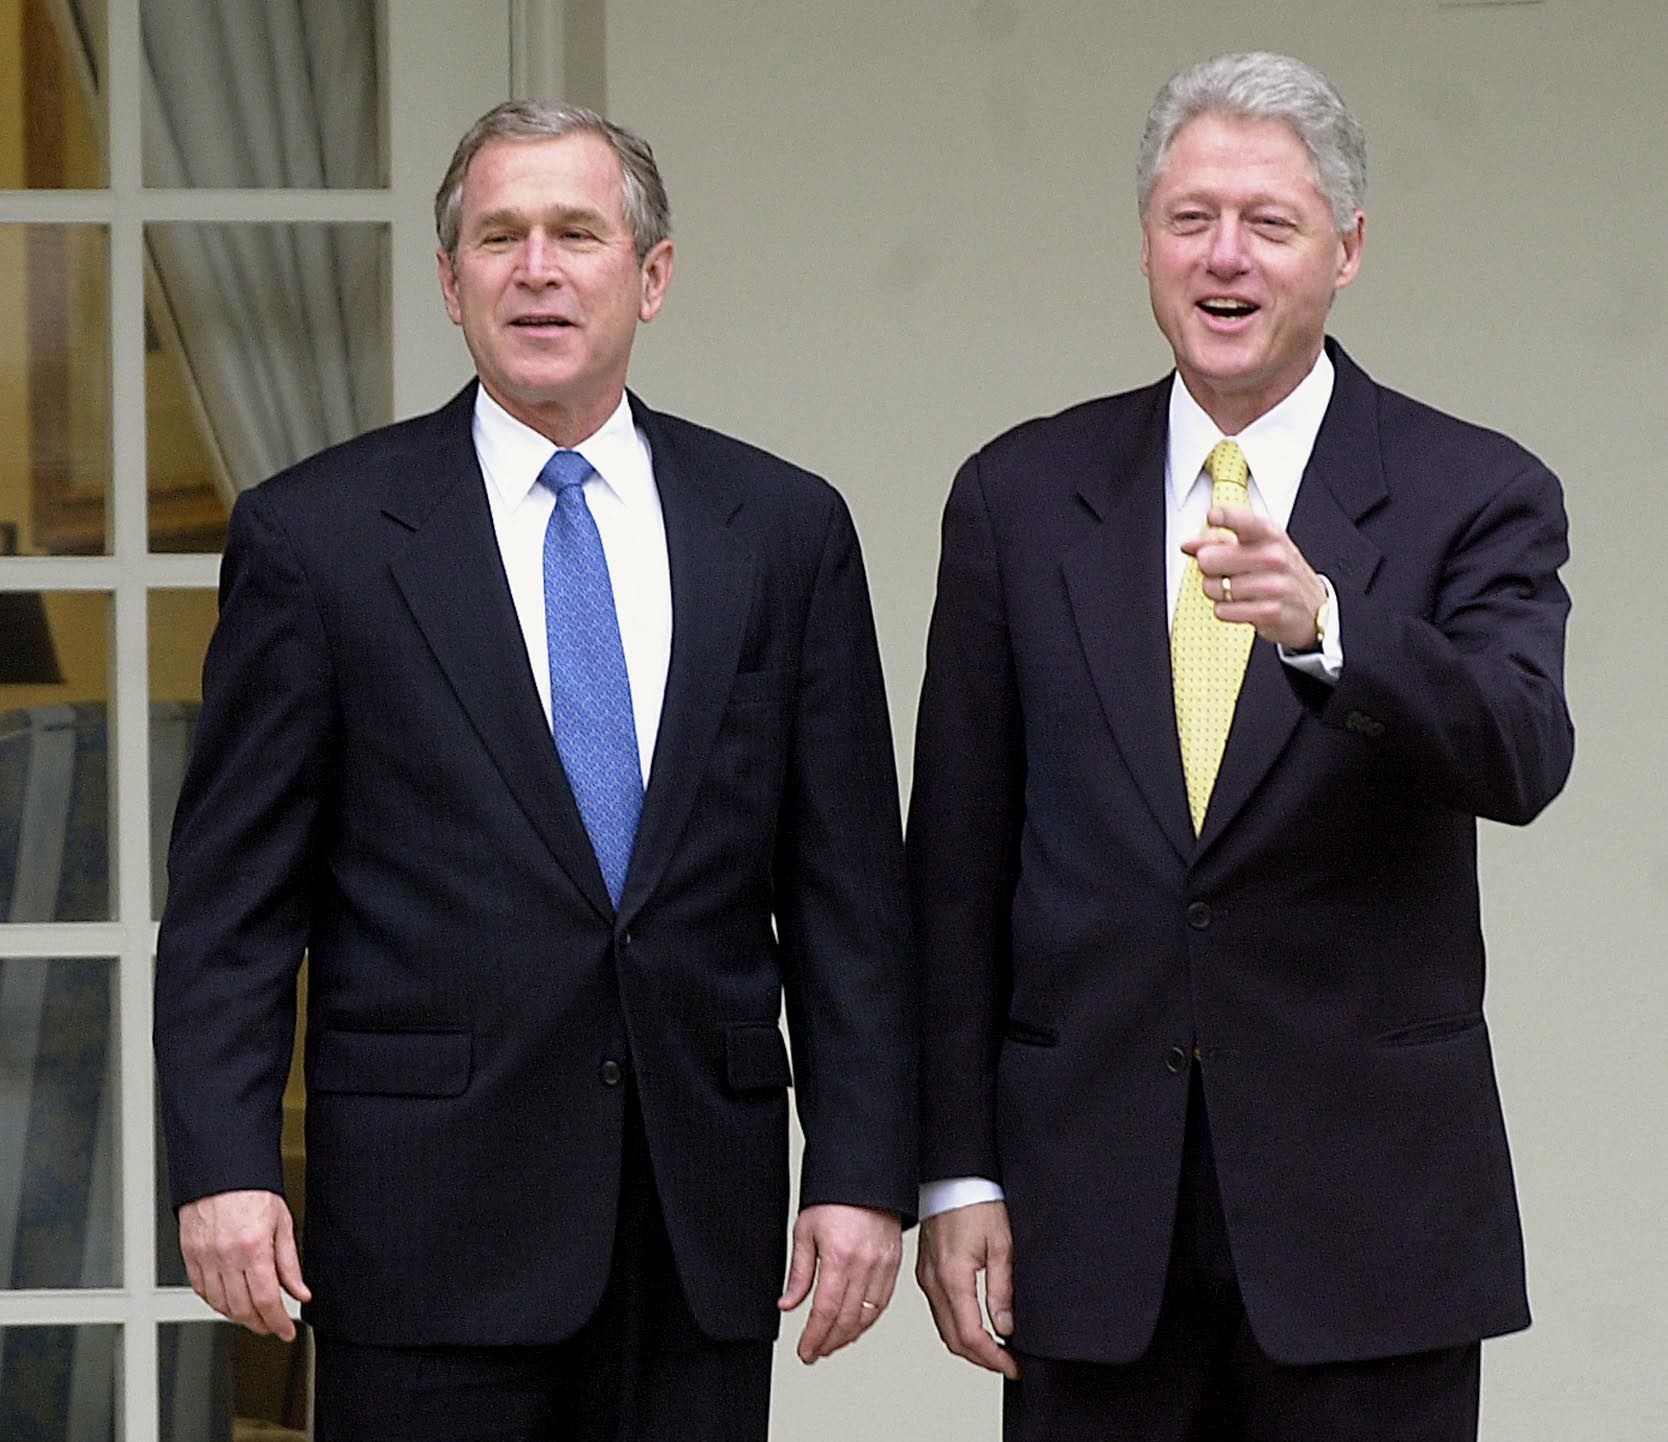 GW Bush and Bill Clinton standing together